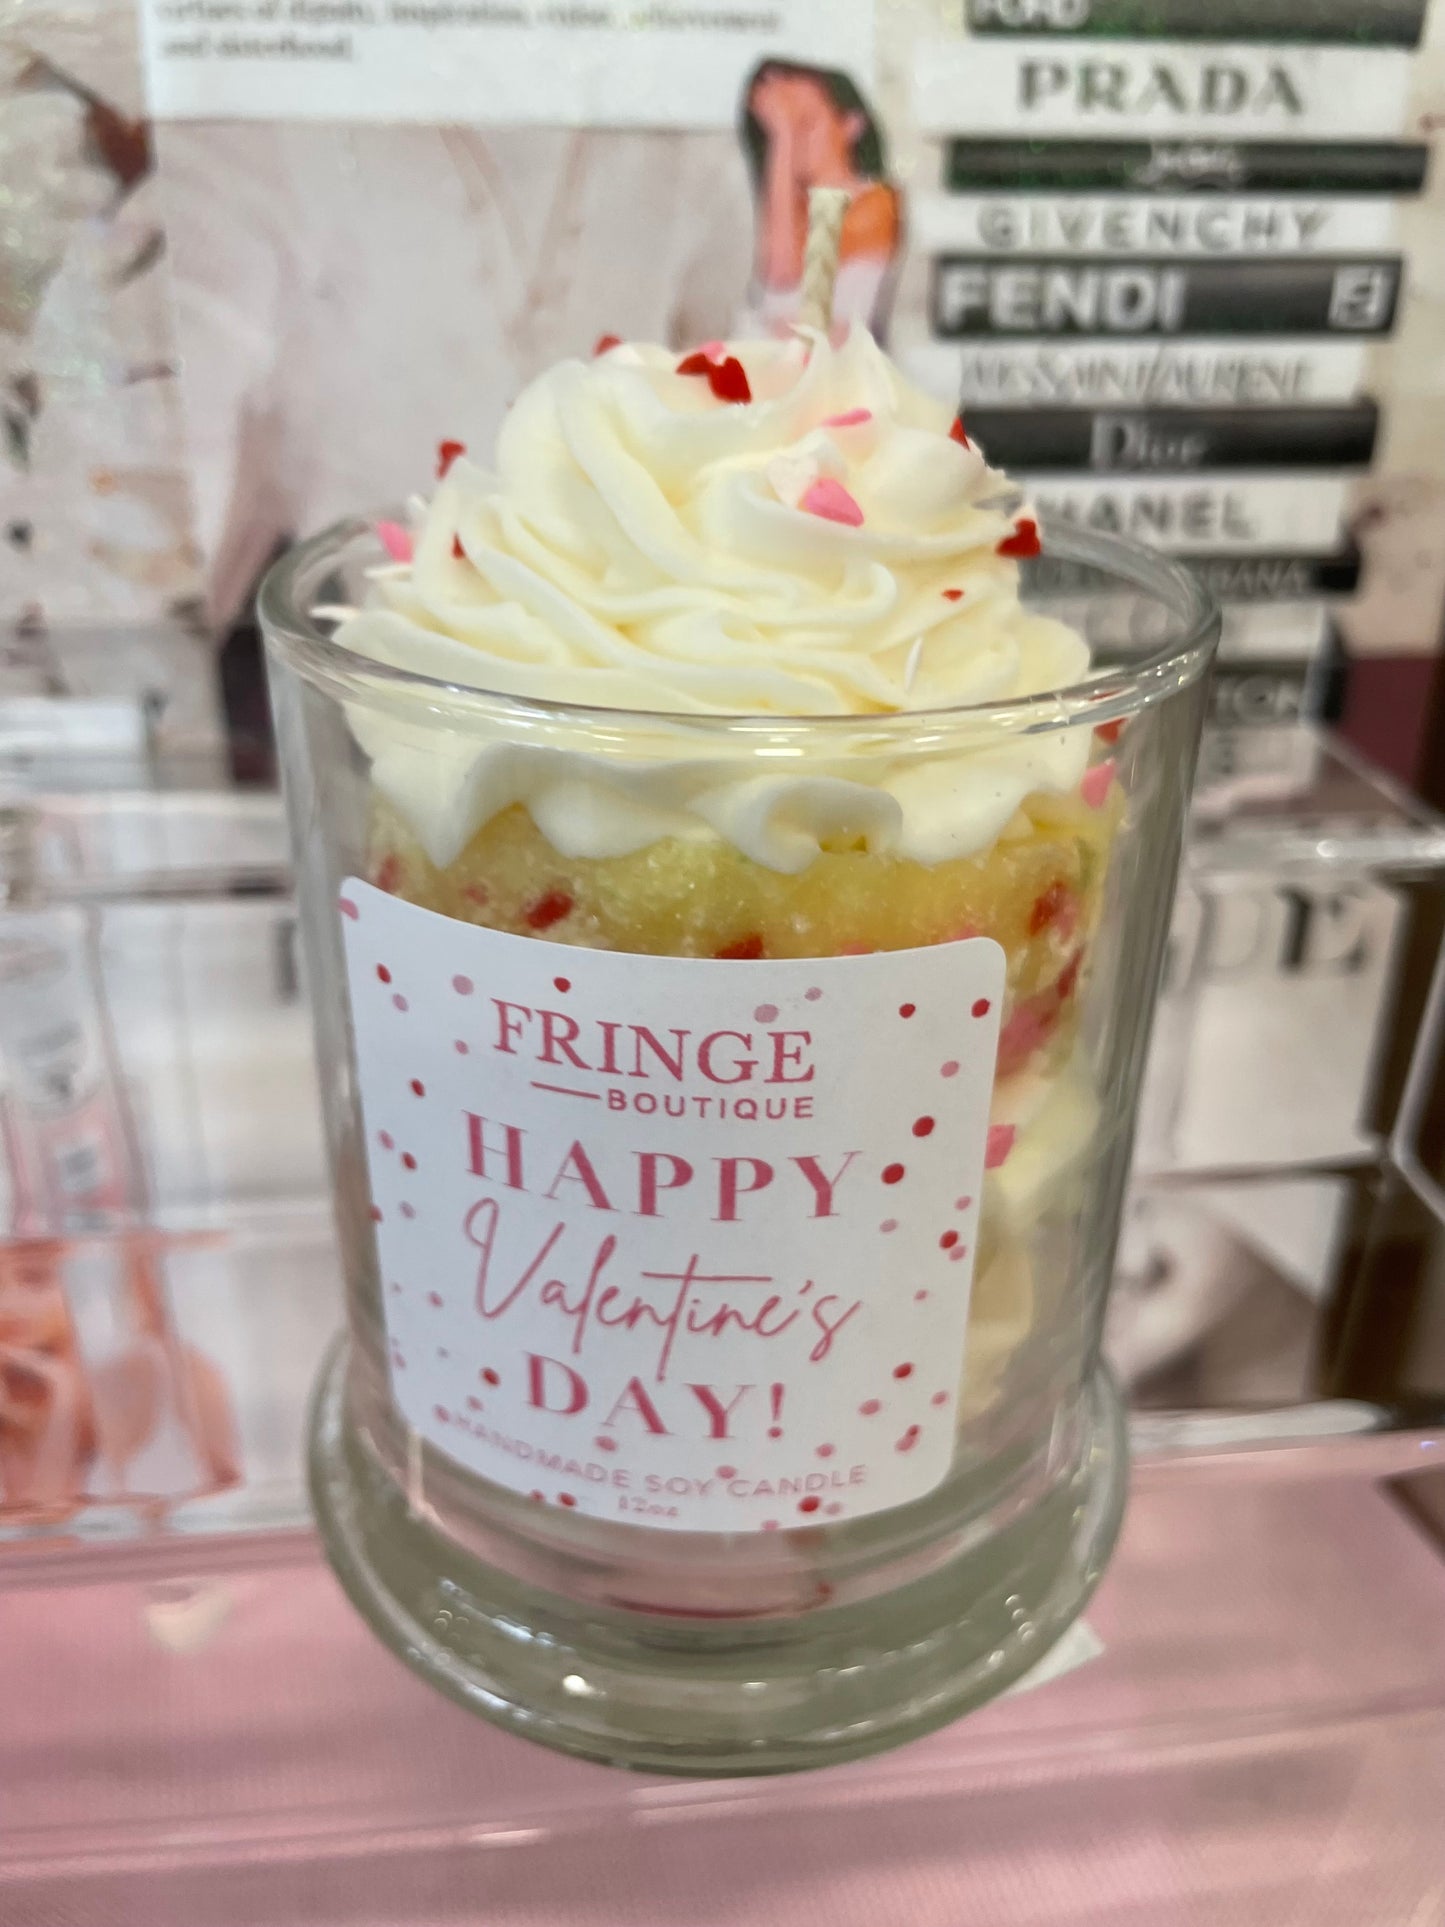 Double Cake Valentine’s Day Candle